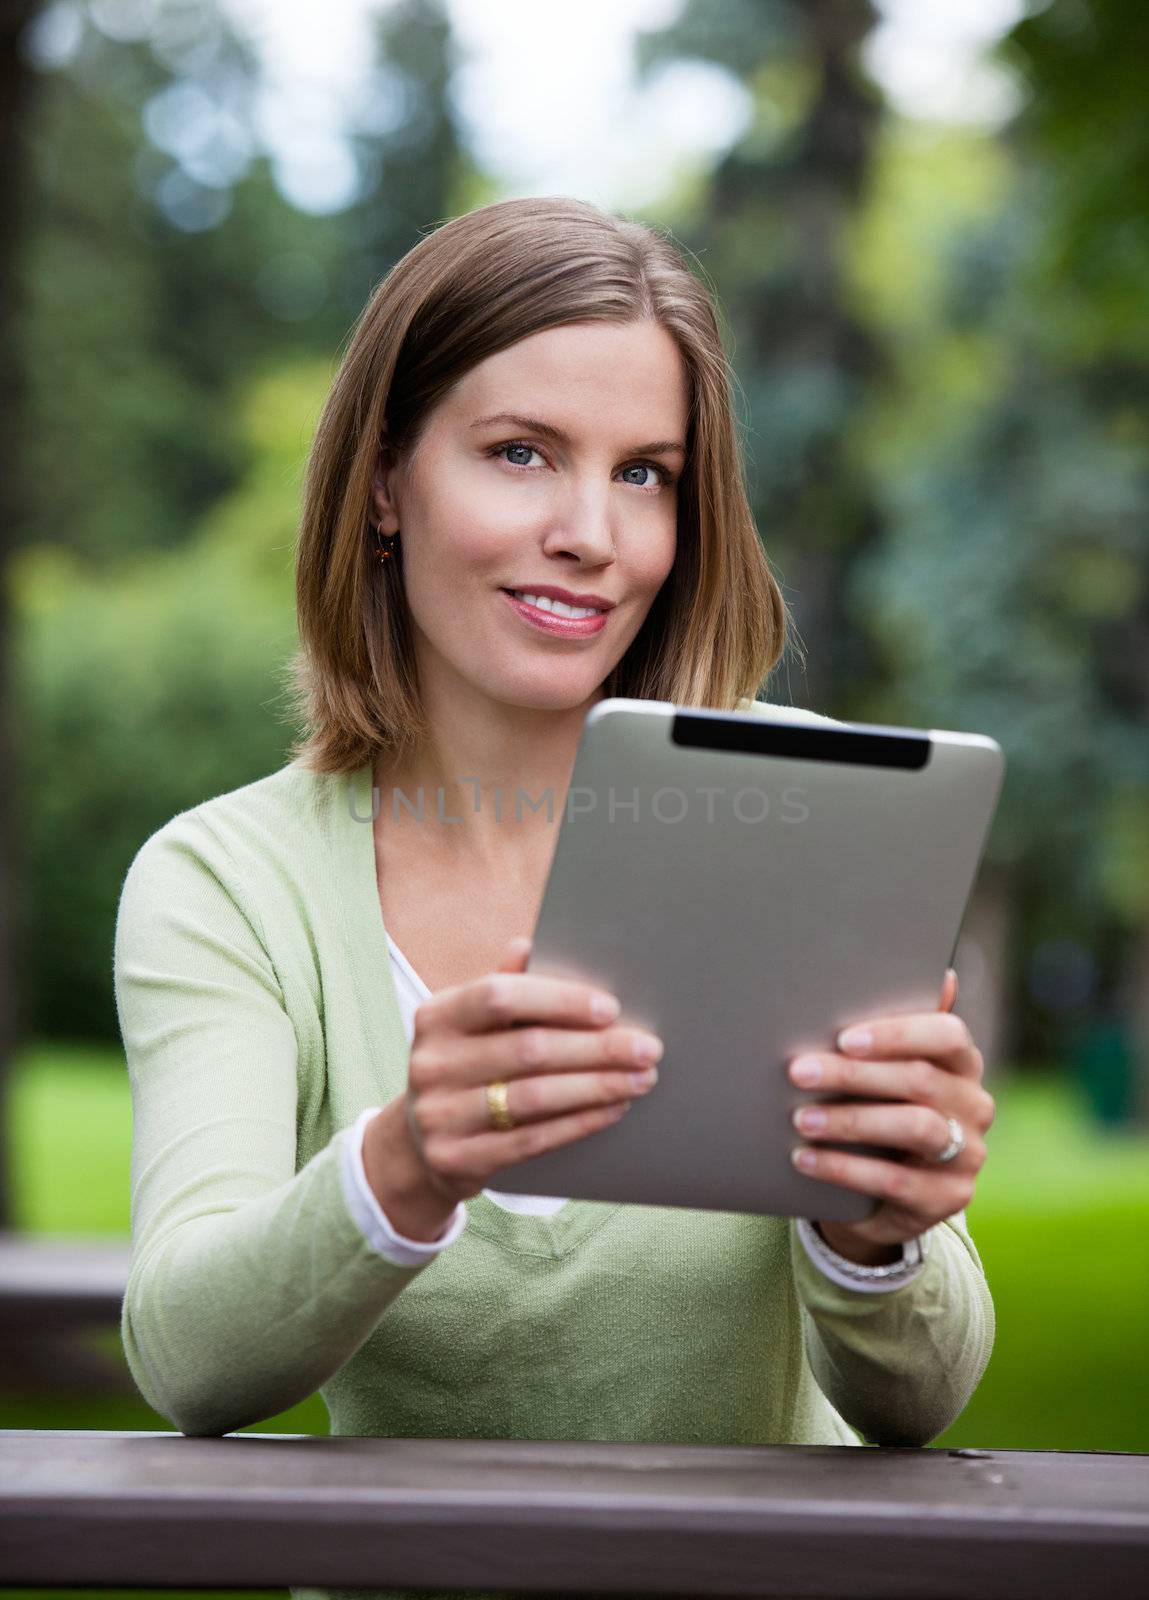 Portrait of attractive young woman reading from digital tablet in park